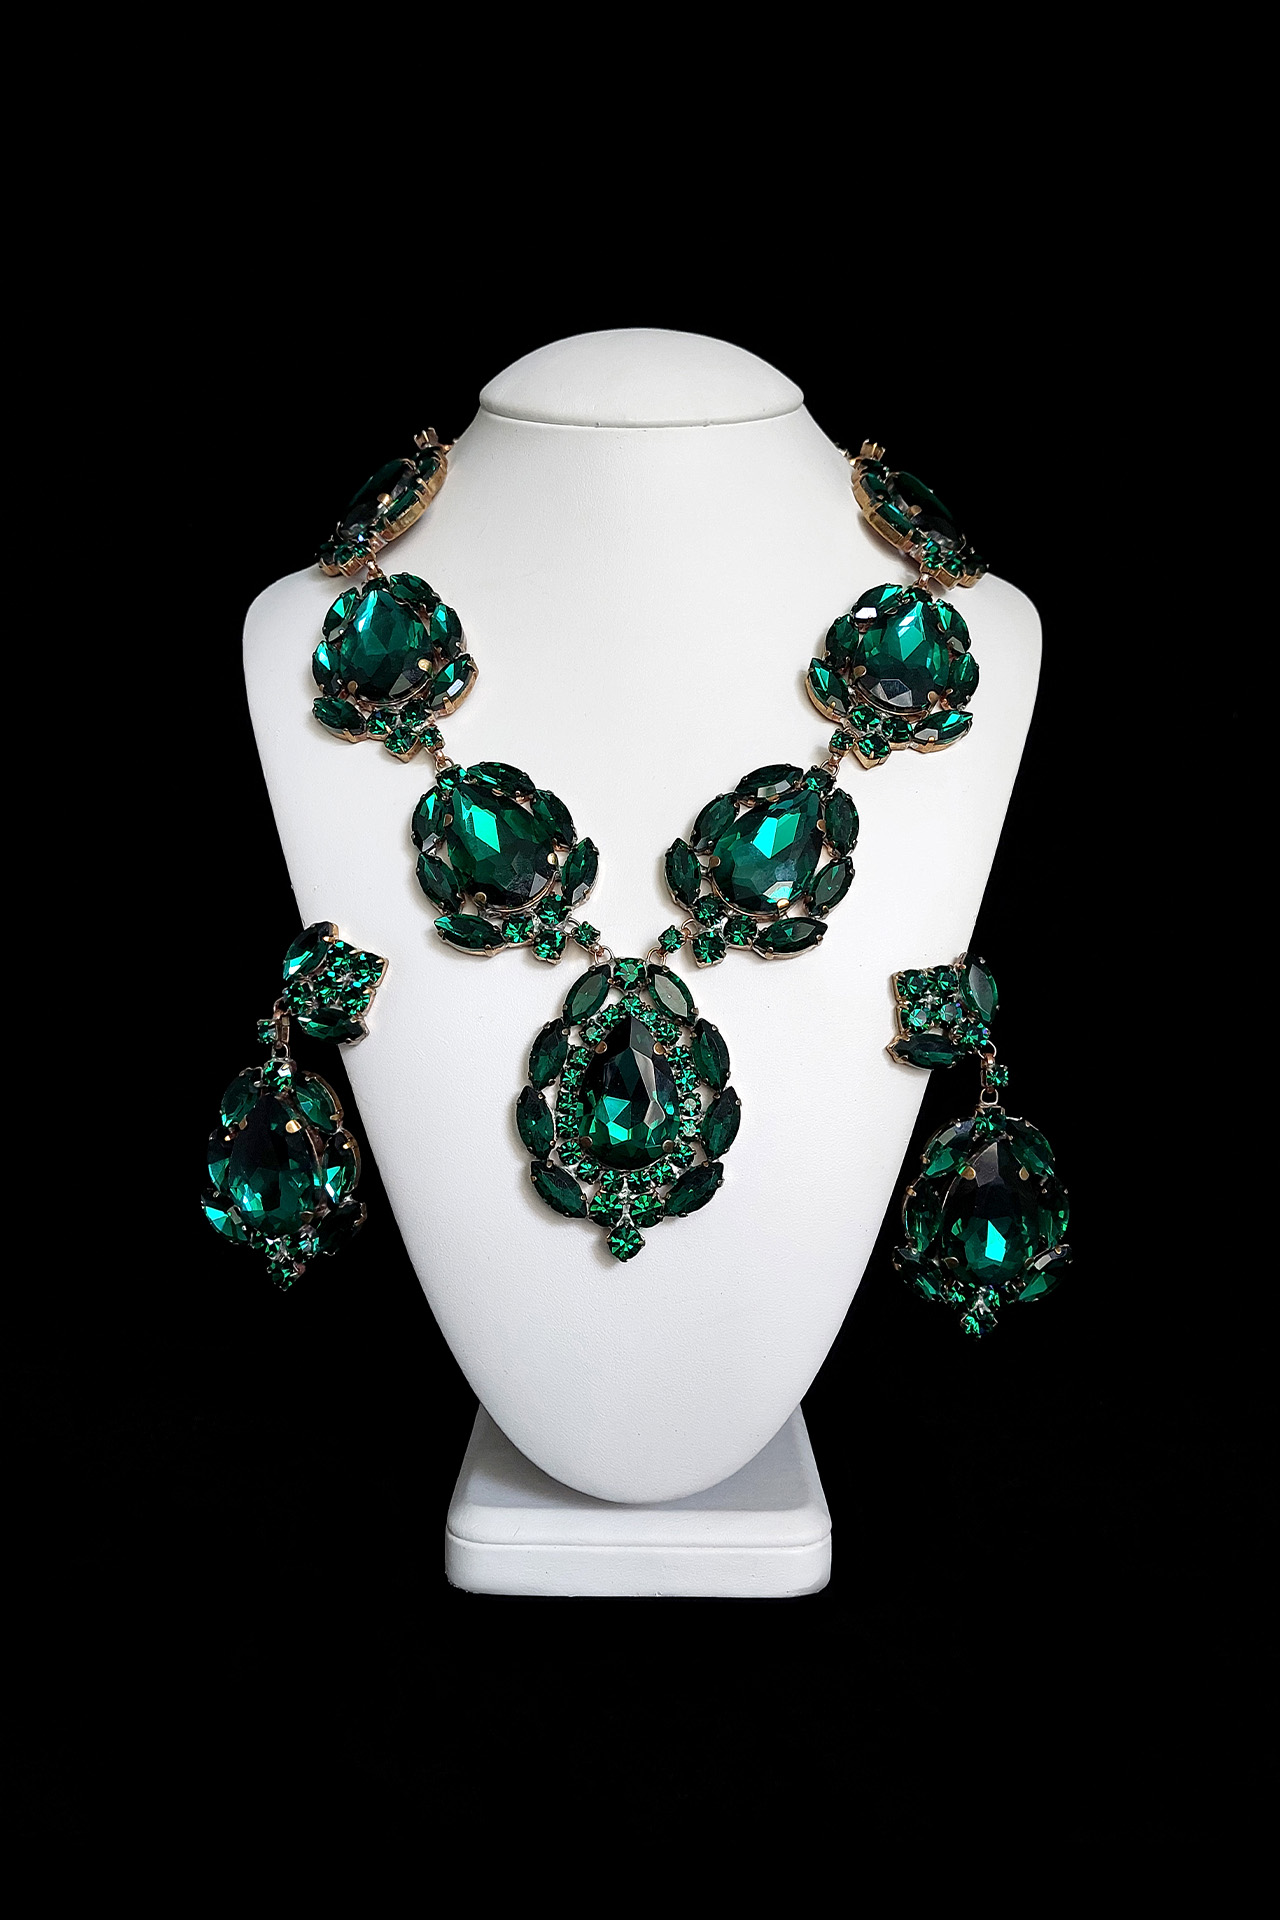 Handmade green necklace and earrings set Sonatine